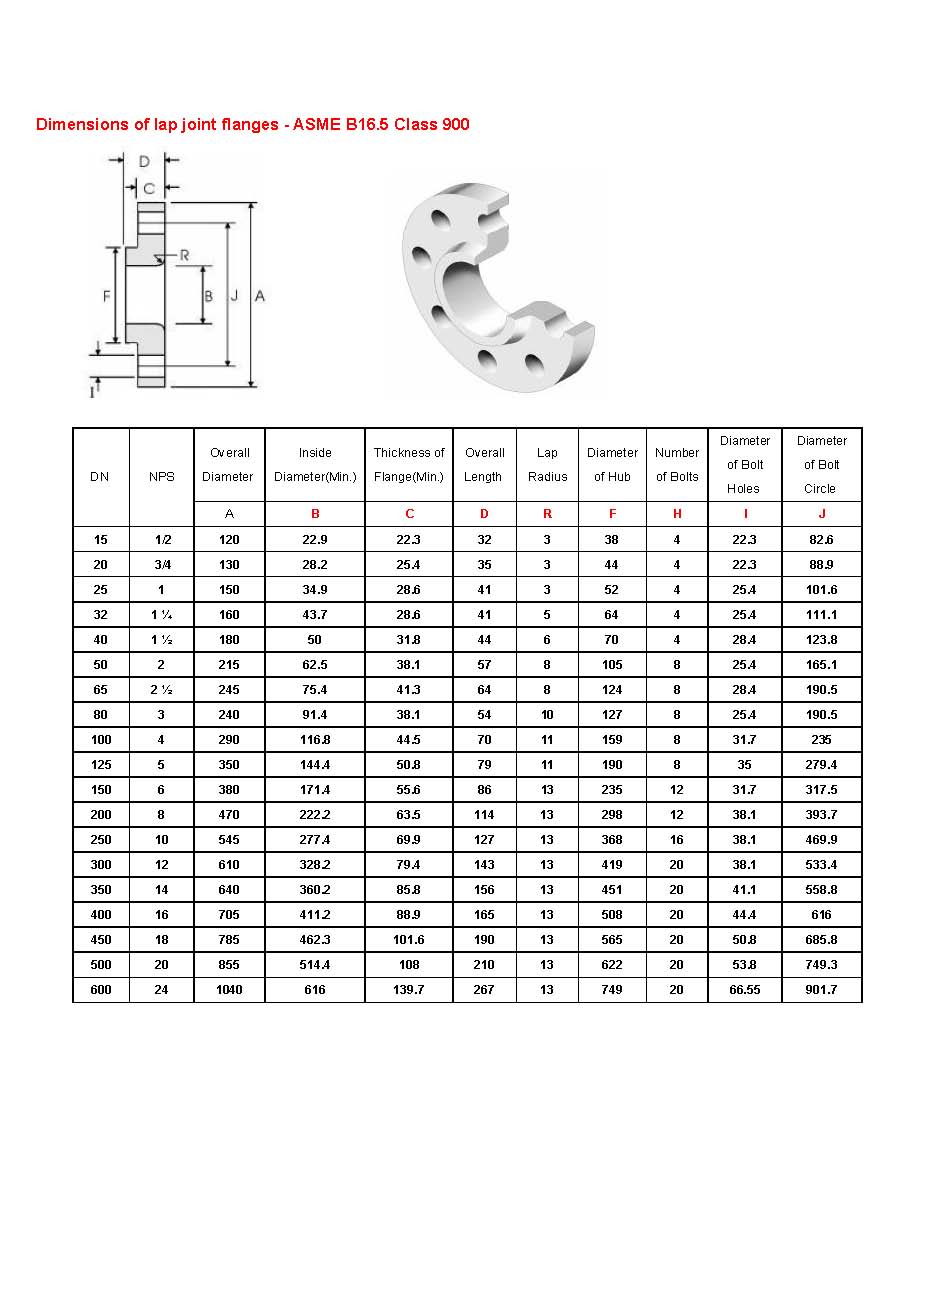 Dimensions of lap joint flanges - ASME B16.5_class900